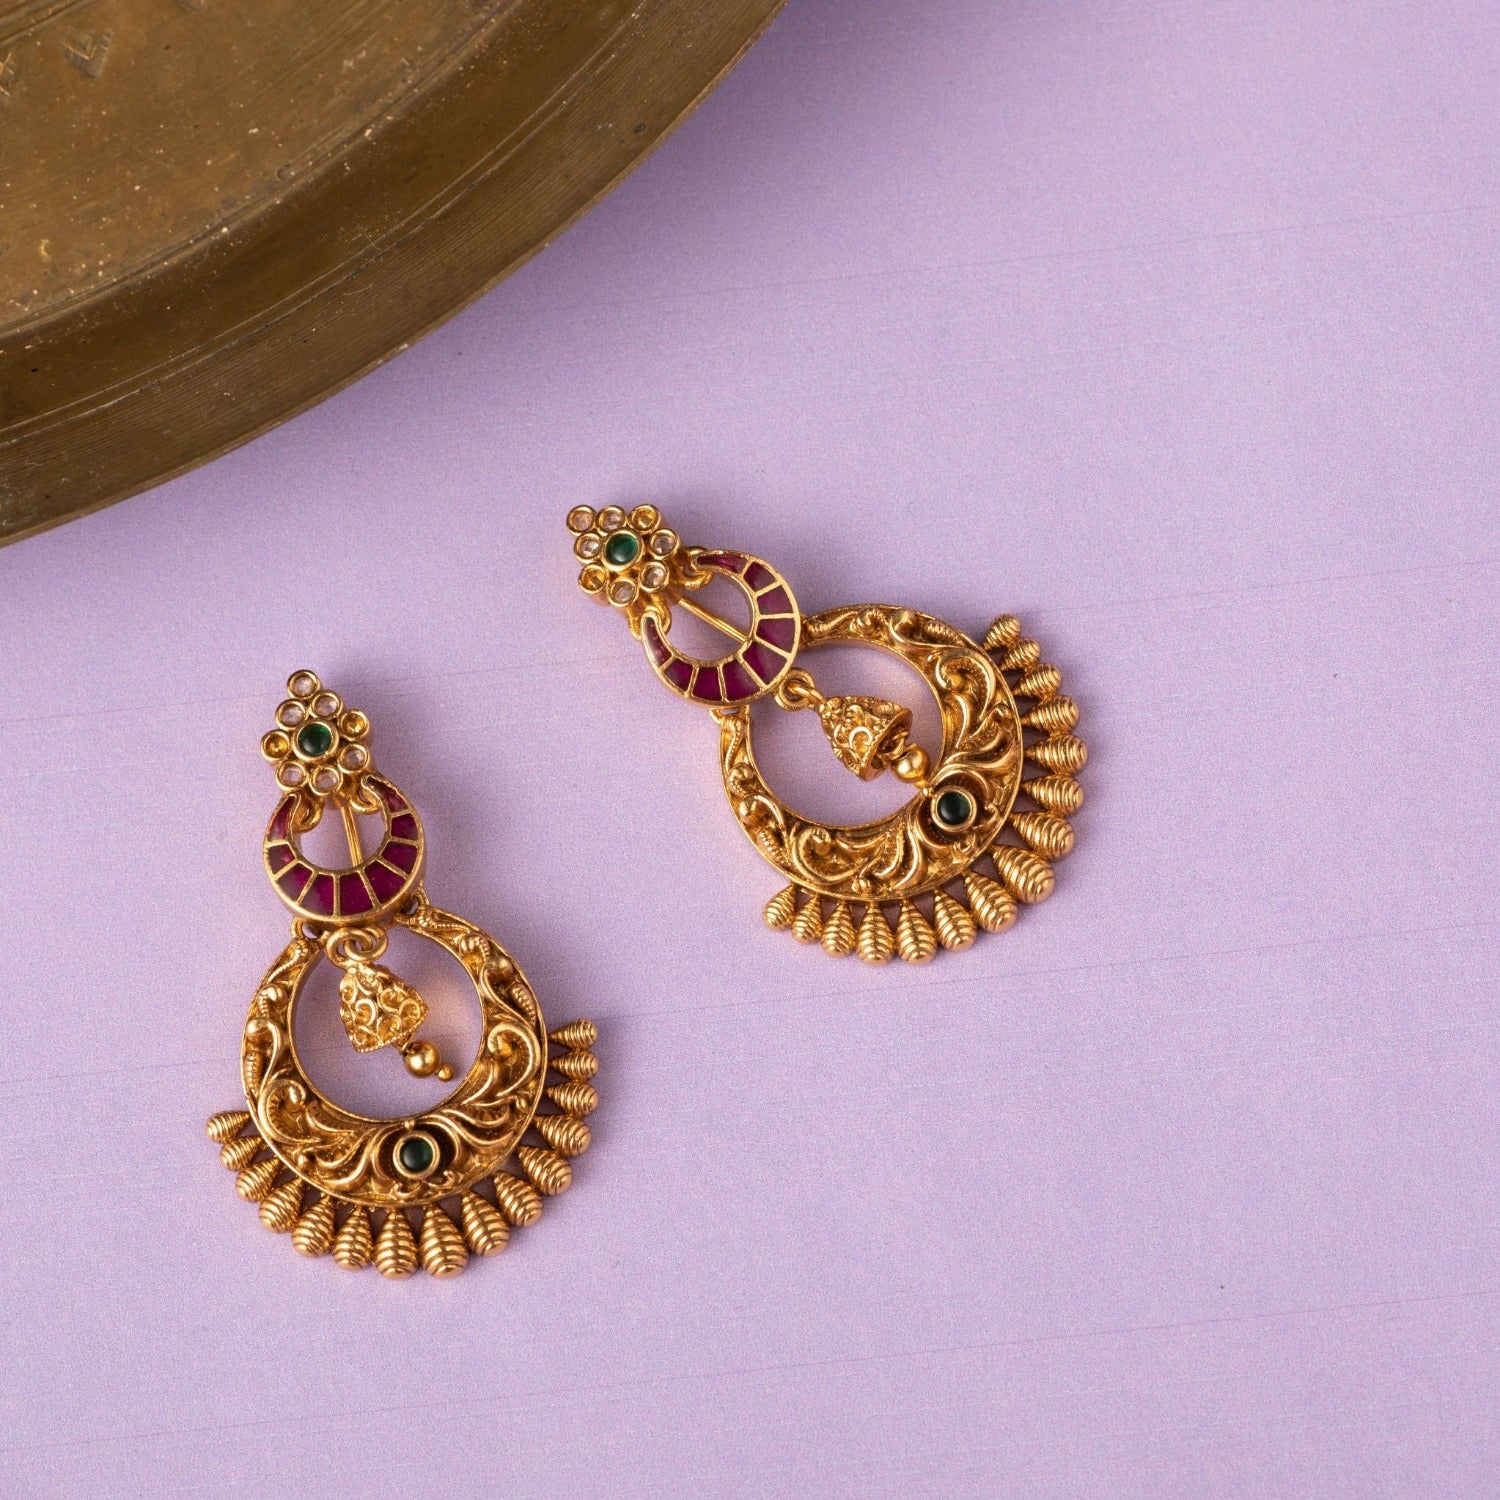 22K Gold Drop Earrings (Chandbali) with Cz, Color Stones & Japanese Culture  Pearls - 235-GER14055 in 13.250 Grams